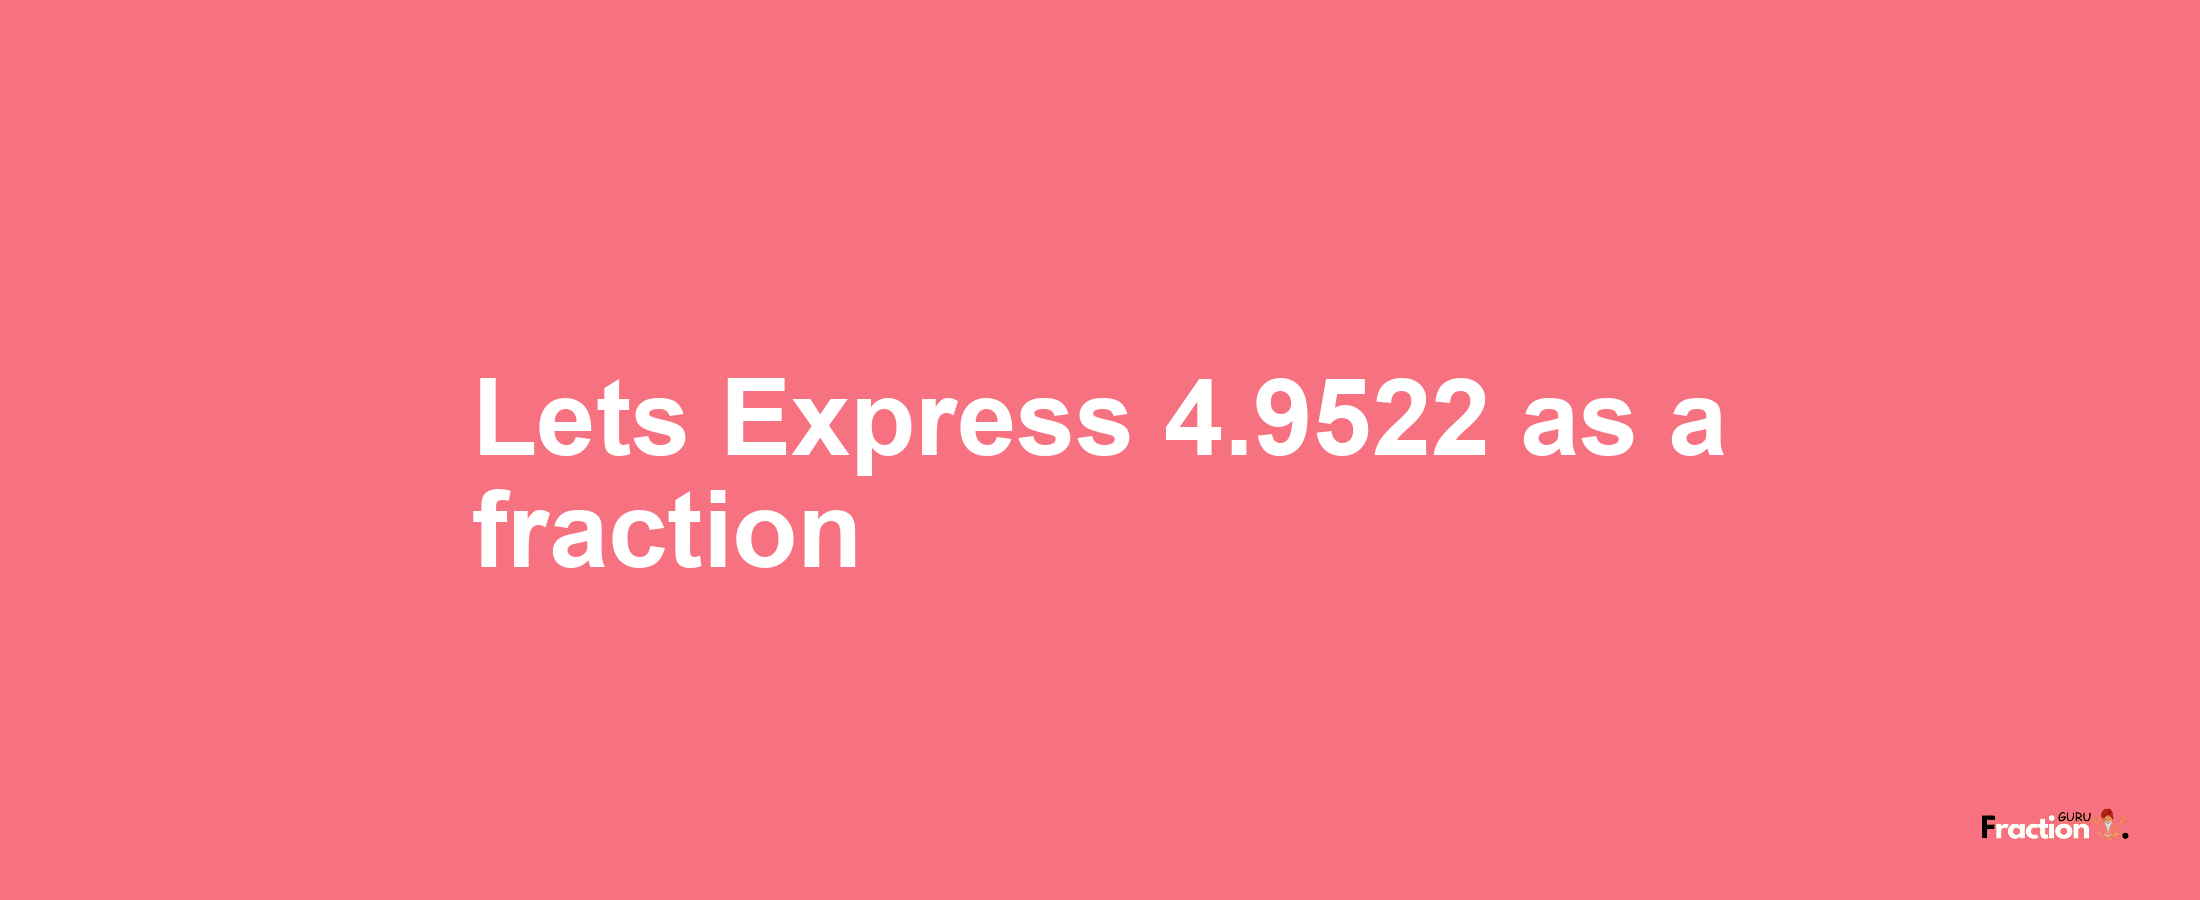 Lets Express 4.9522 as afraction